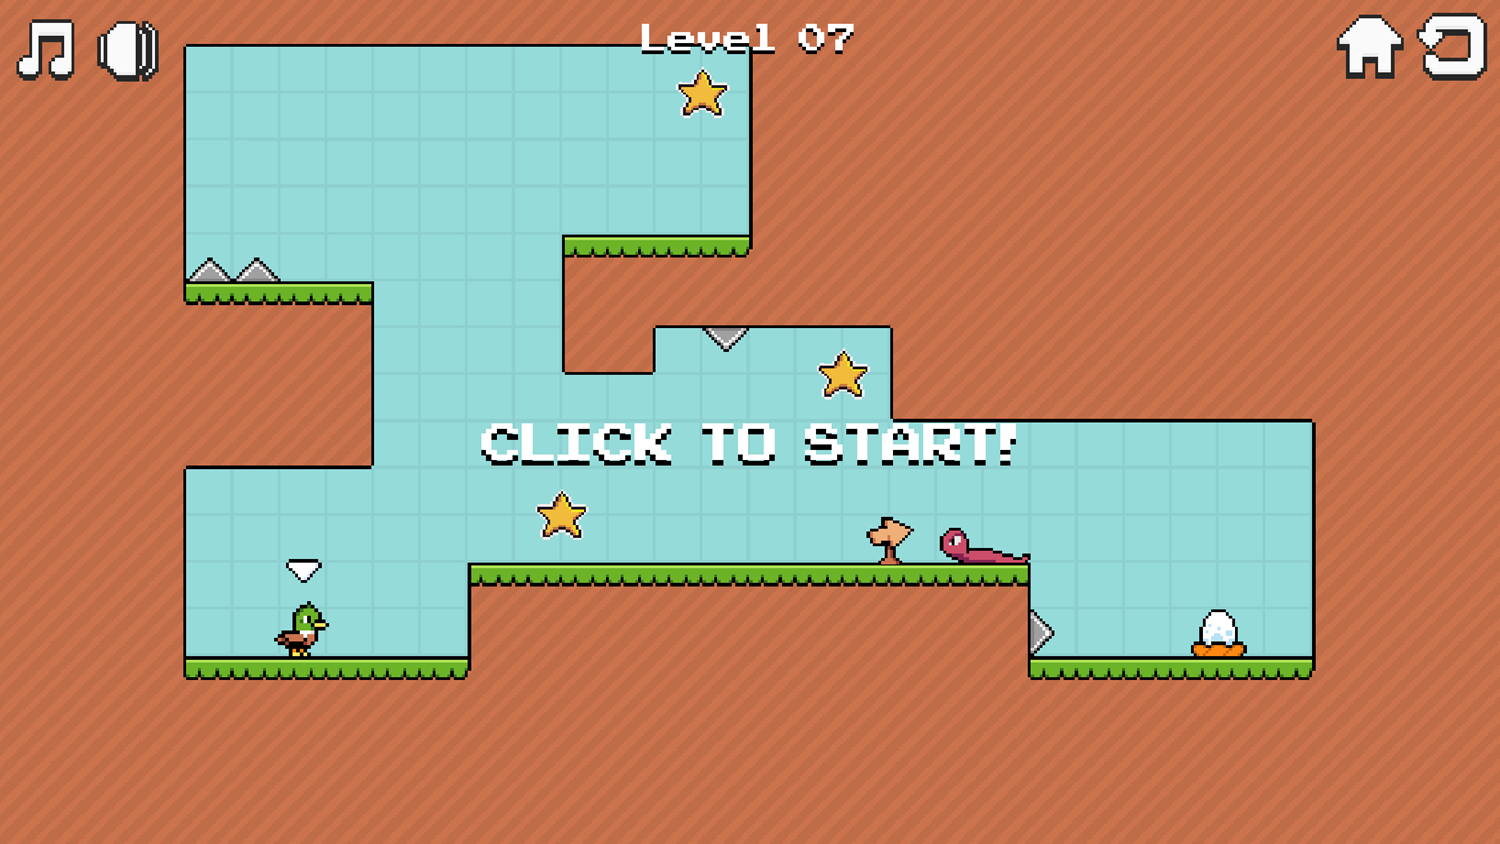 Duck Auto Run Game Level With a Snake Screenshot.